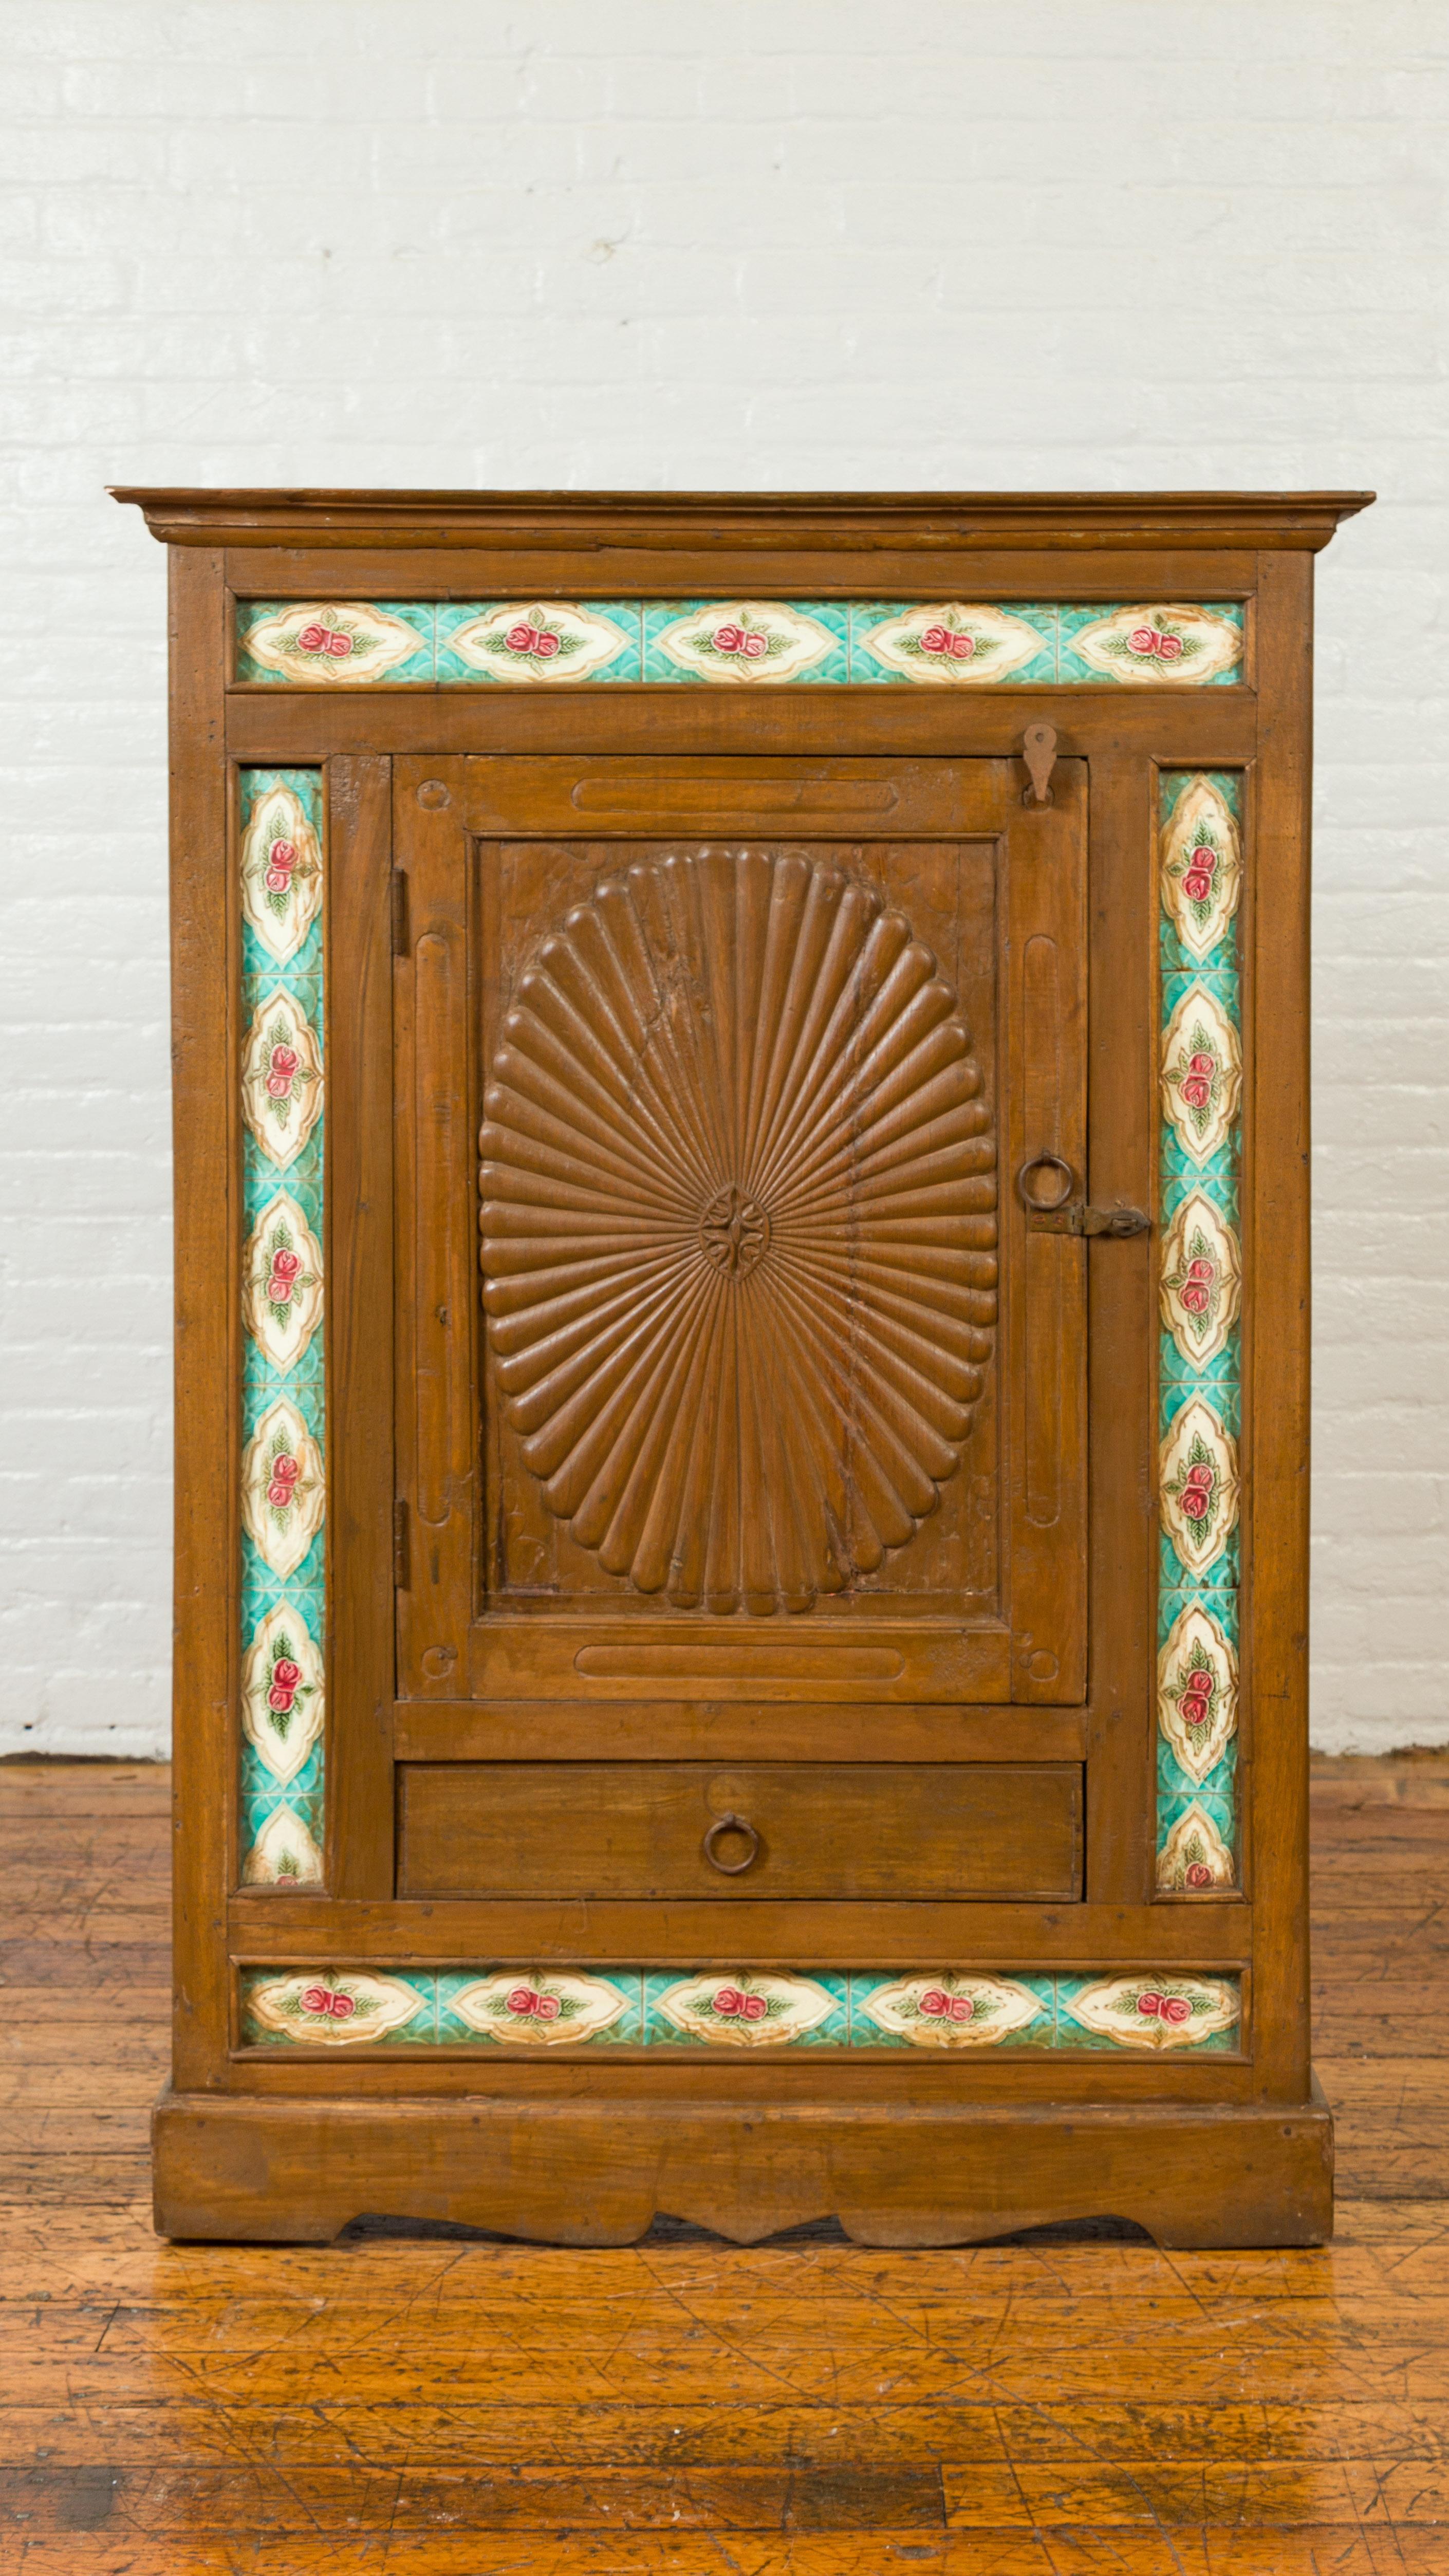 Ceramic Indian Small Cabinet with Sunburst Design and Hand Painted Tiles with Rose Motif For Sale